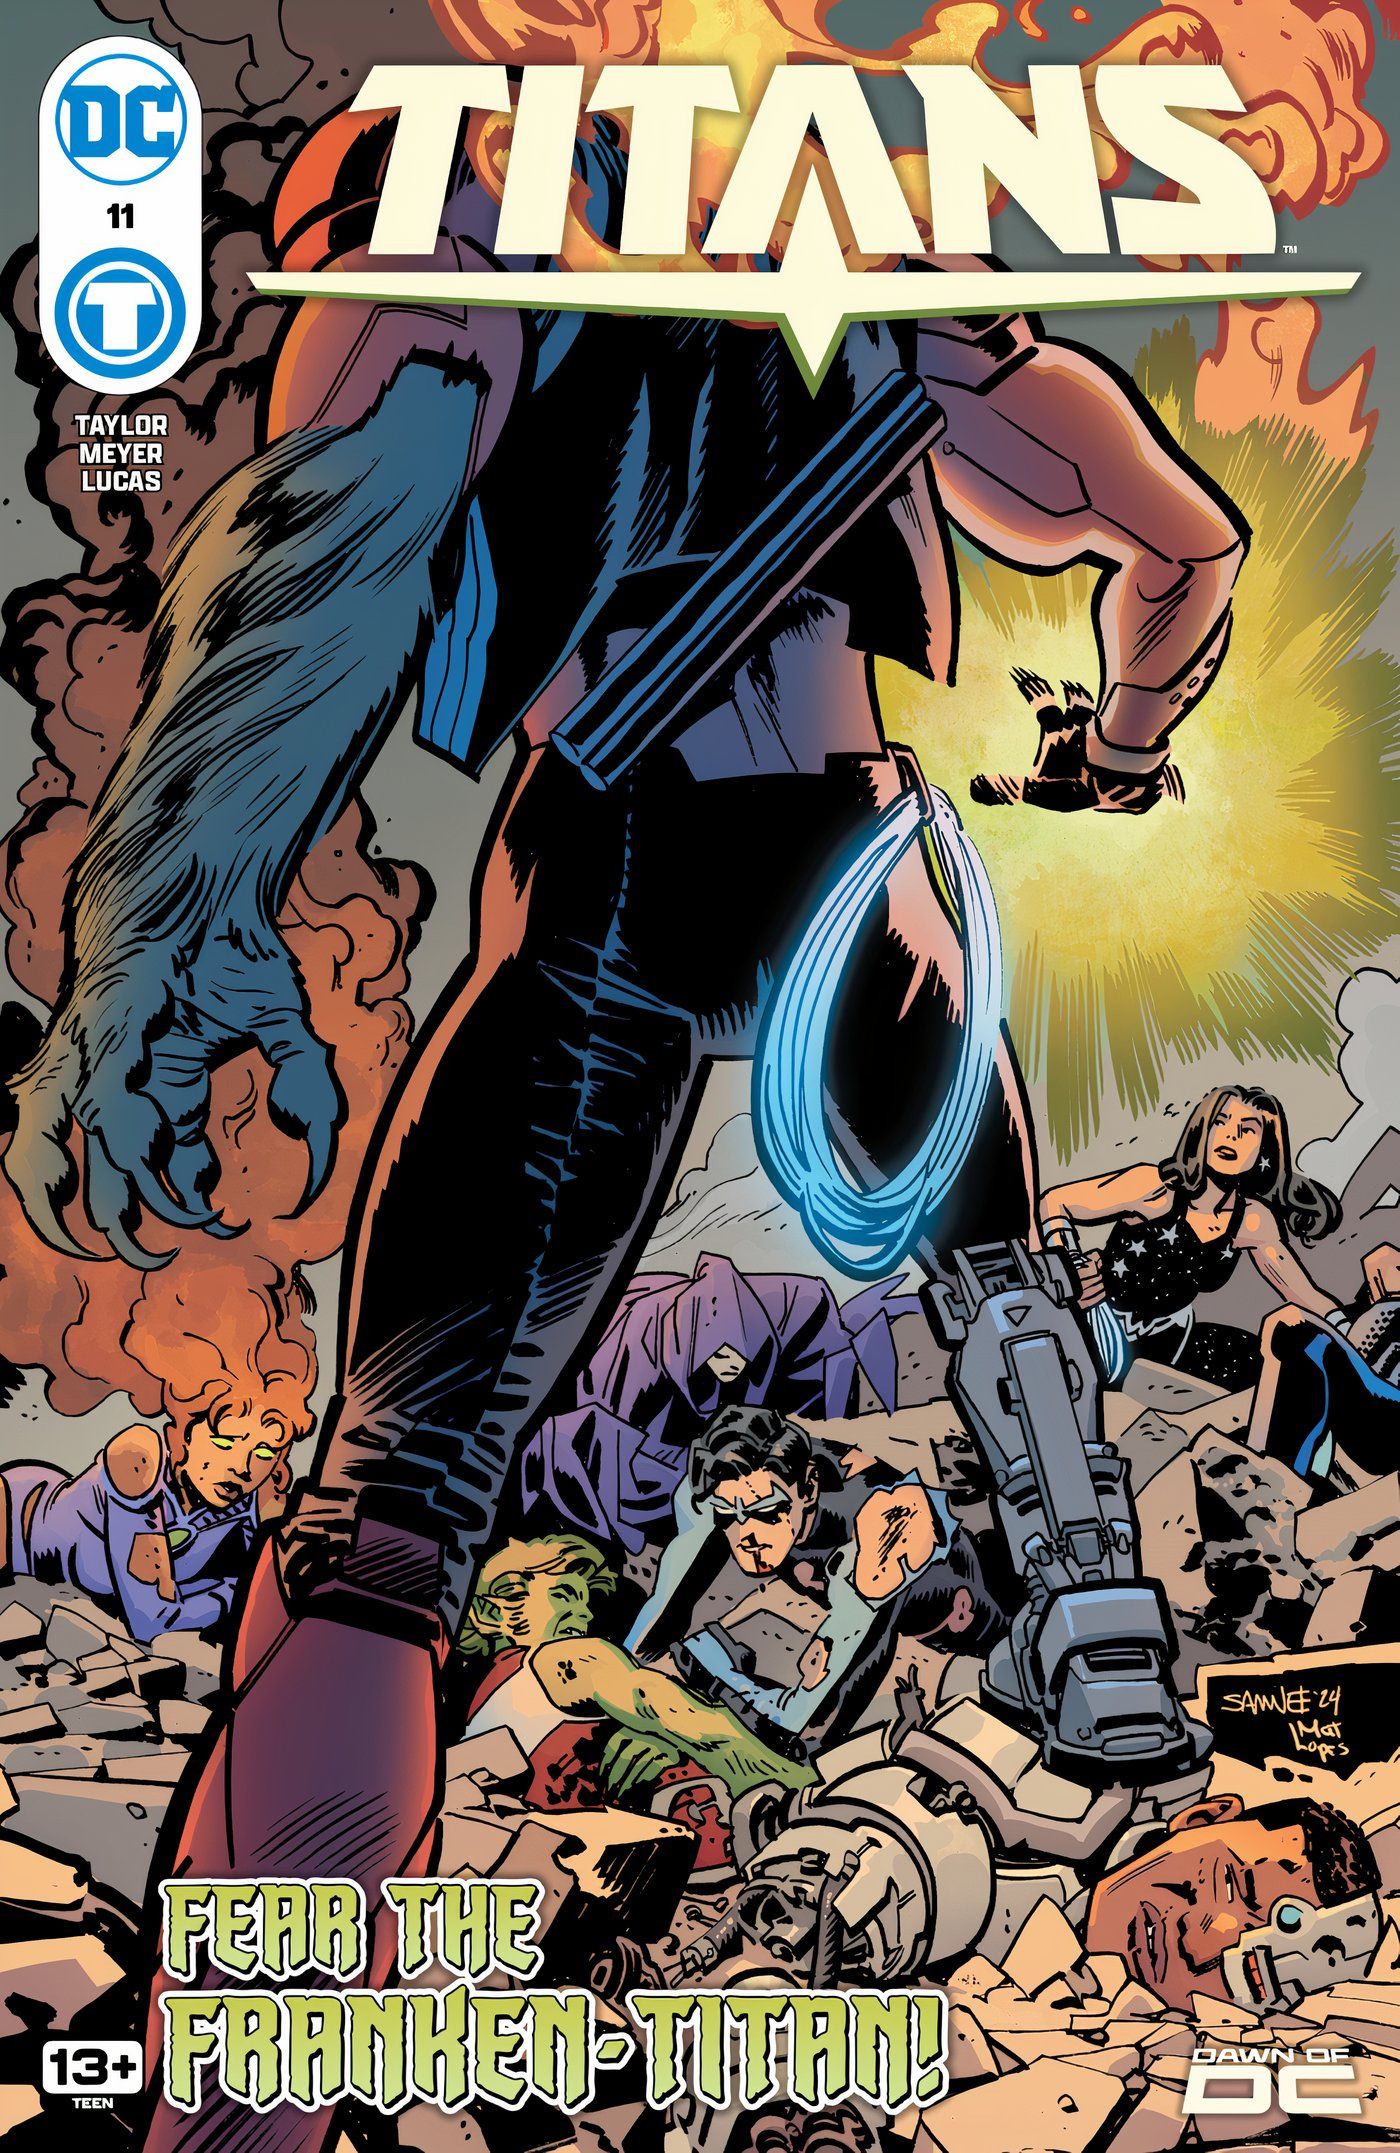 Titans 11 Main Cover: Vanadia's back approaches the fallen Titans, including Nightwing.